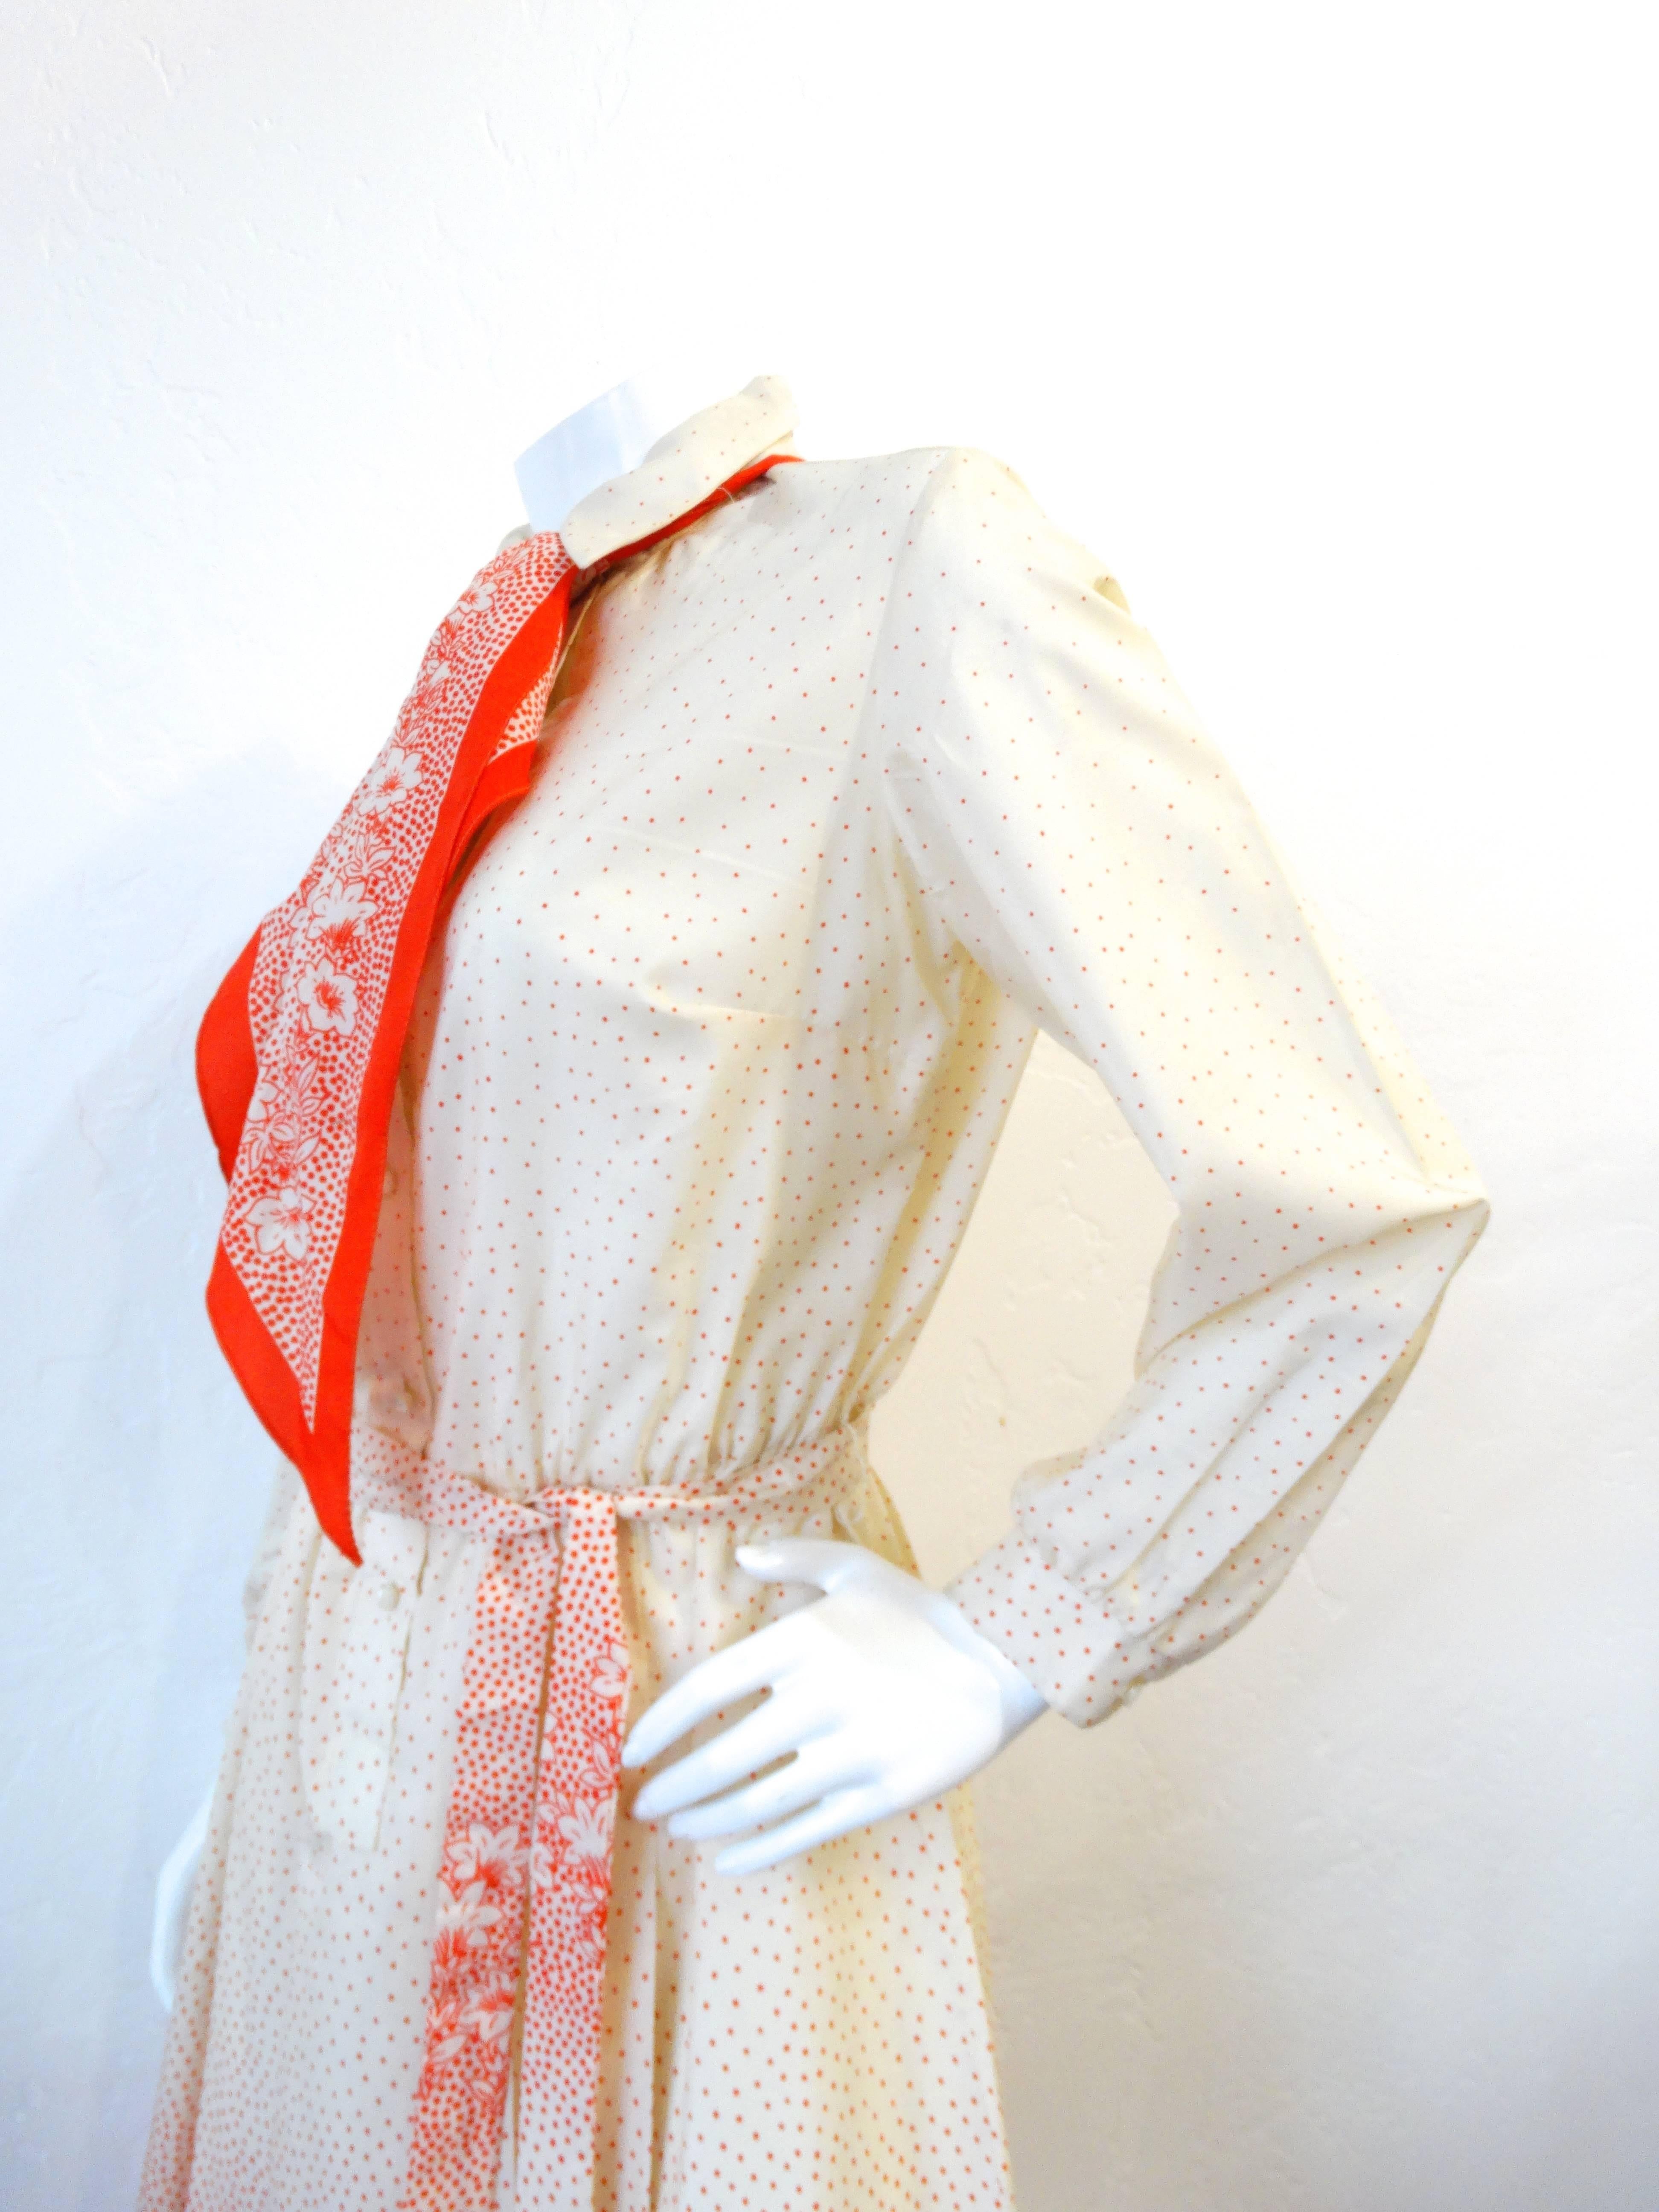 1960s Lanvin Cream & Red Polkadot Floral Dress For Sale 2